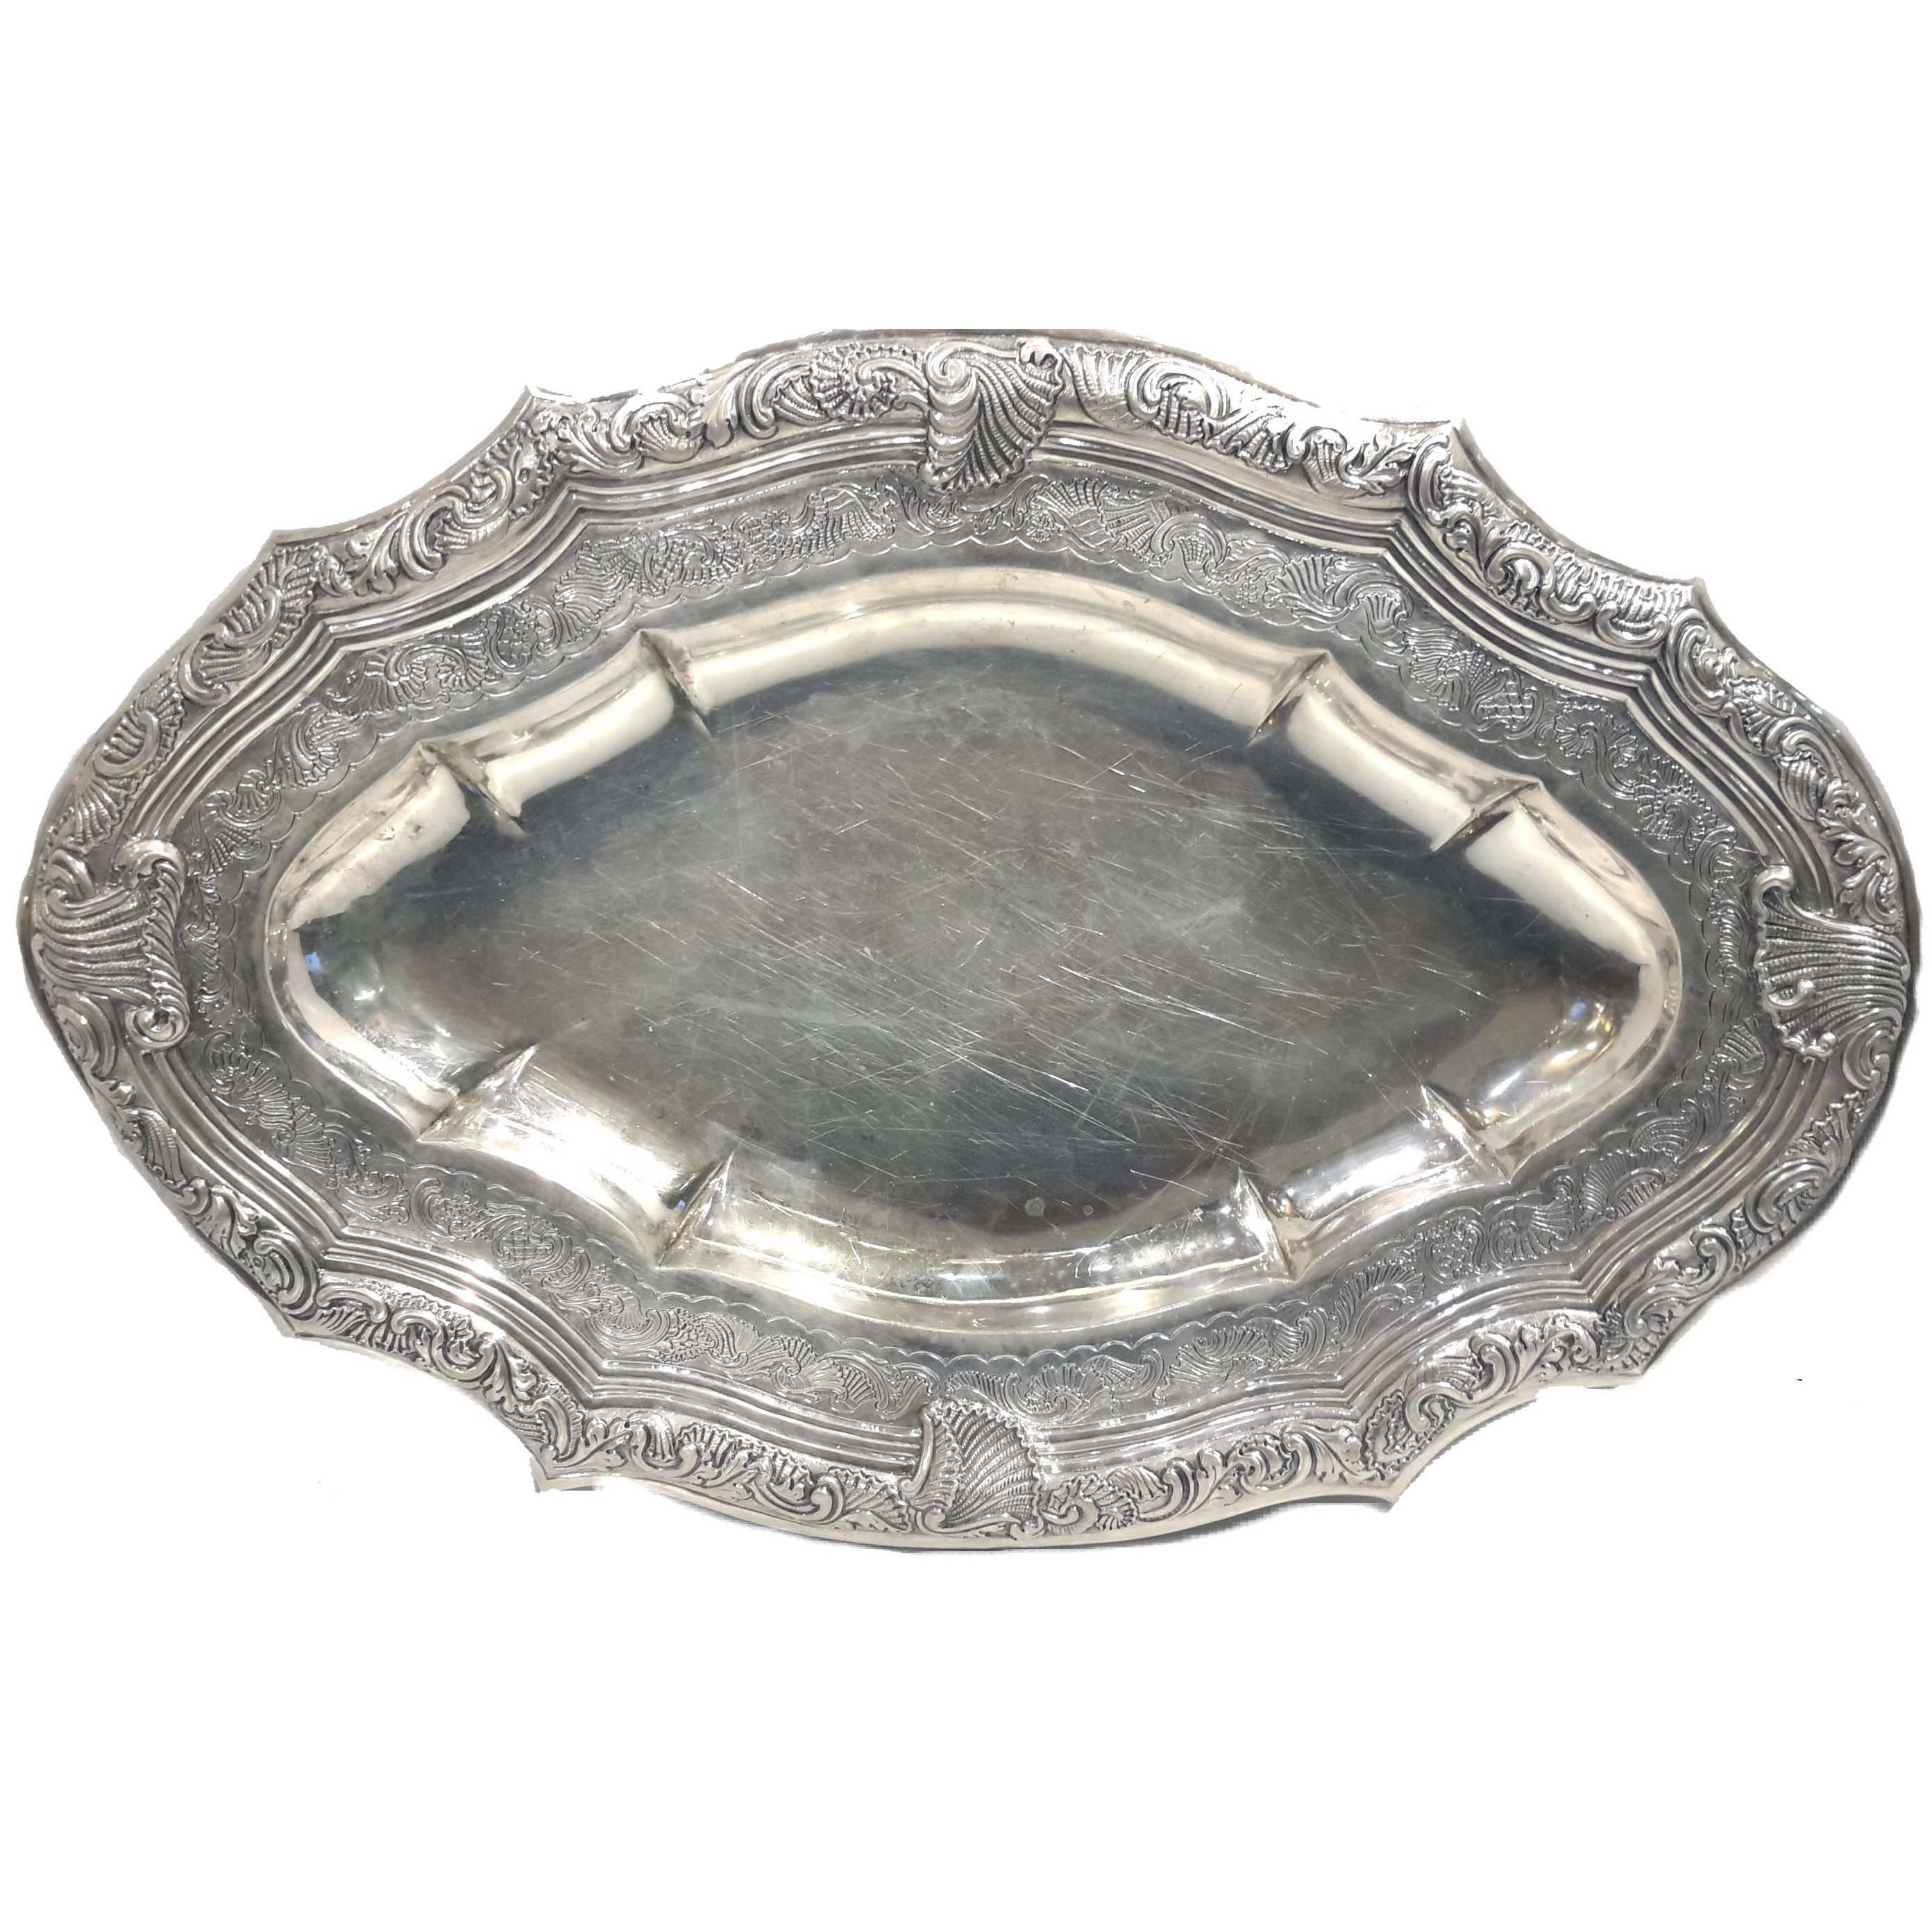 Spanish Colonial Sterling Silver Oval Platter, 18-19th Century